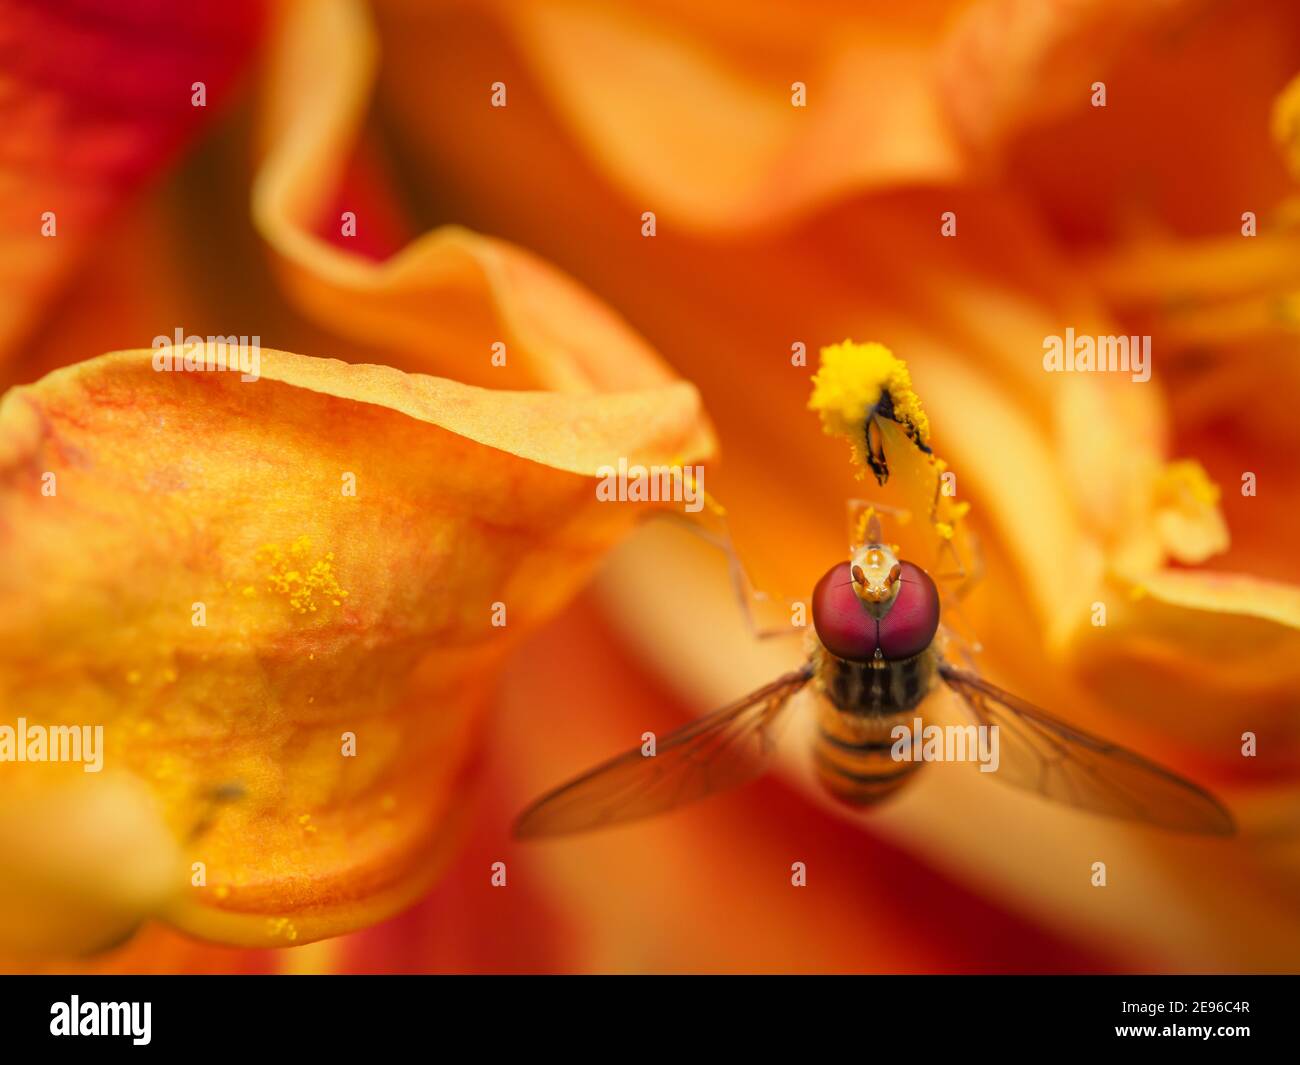 A hoverfly feeds and collects pollen suspended amongst bright orange flower petals Stock Photo